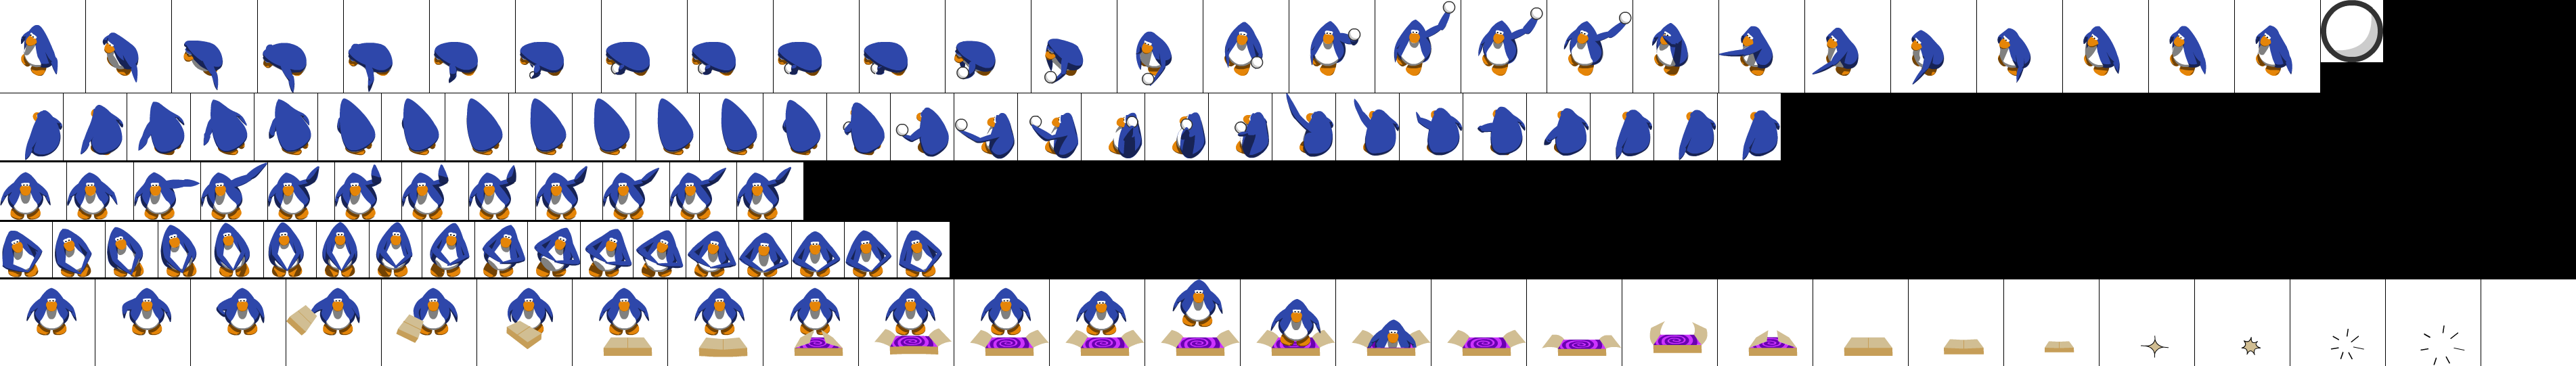 Club Penguin - Penguin Special Animations (Old Blue)